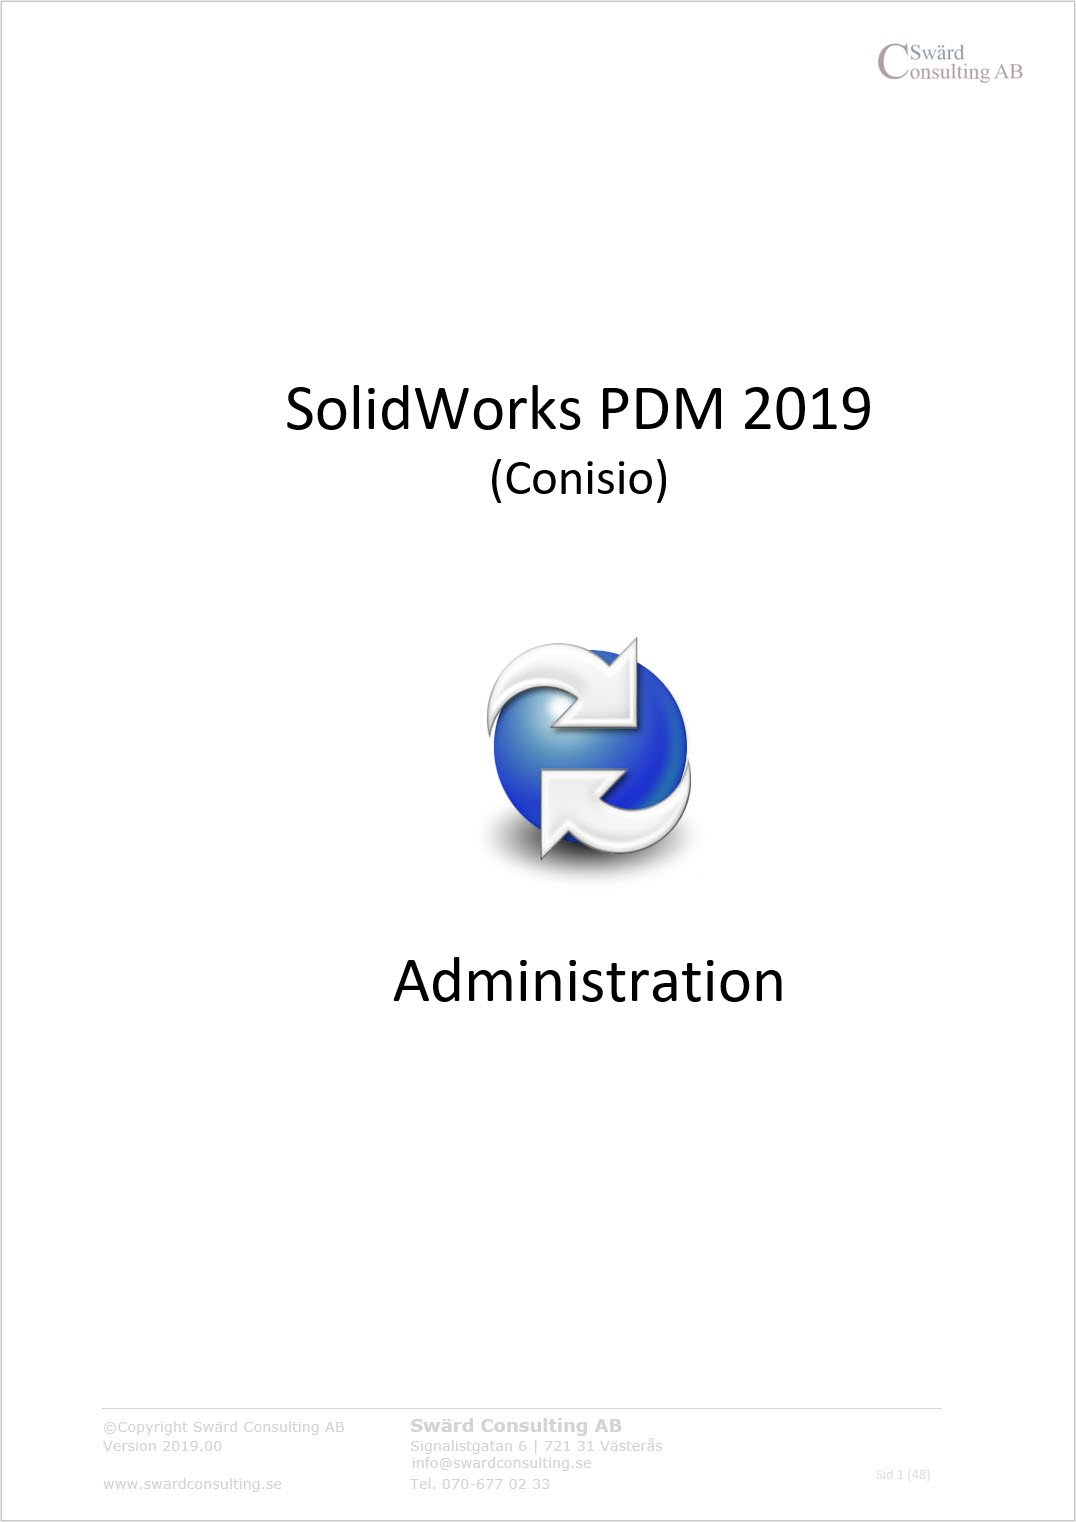 Svensk administrations manual SolidWorks PDM 2019 (Conisio)